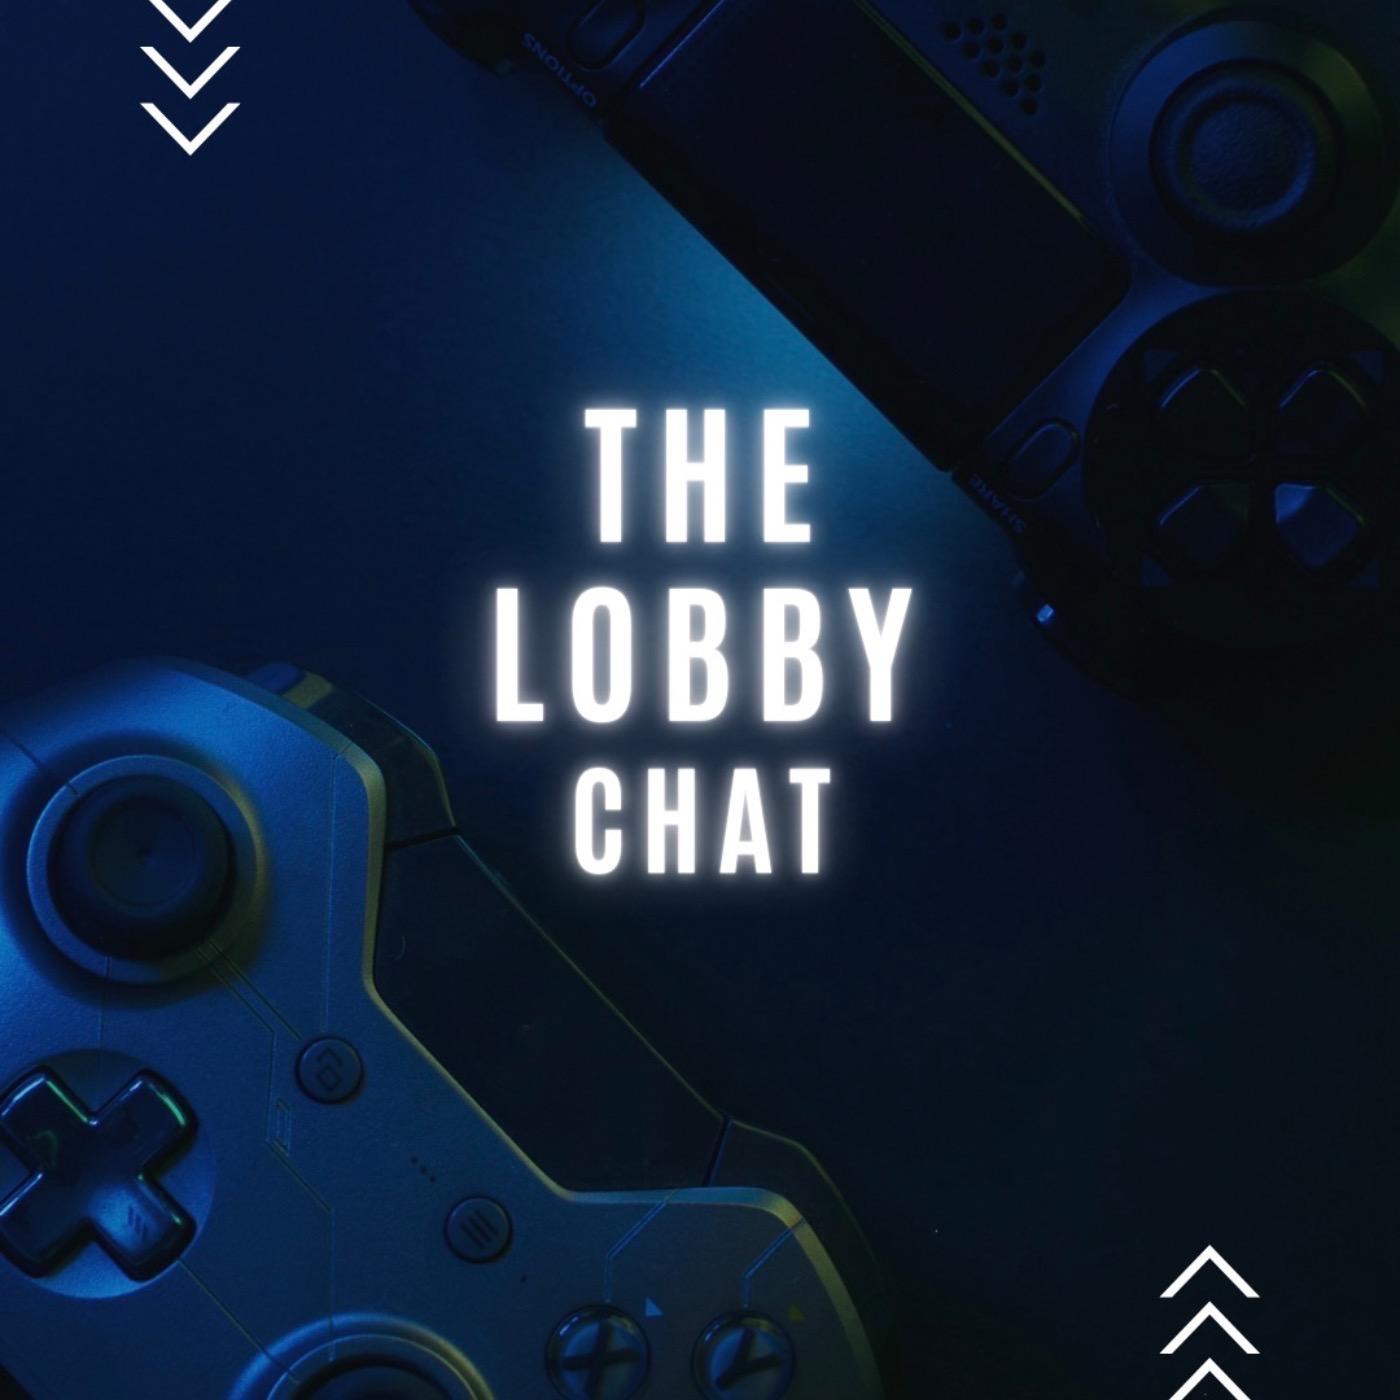 The Lobby Chat